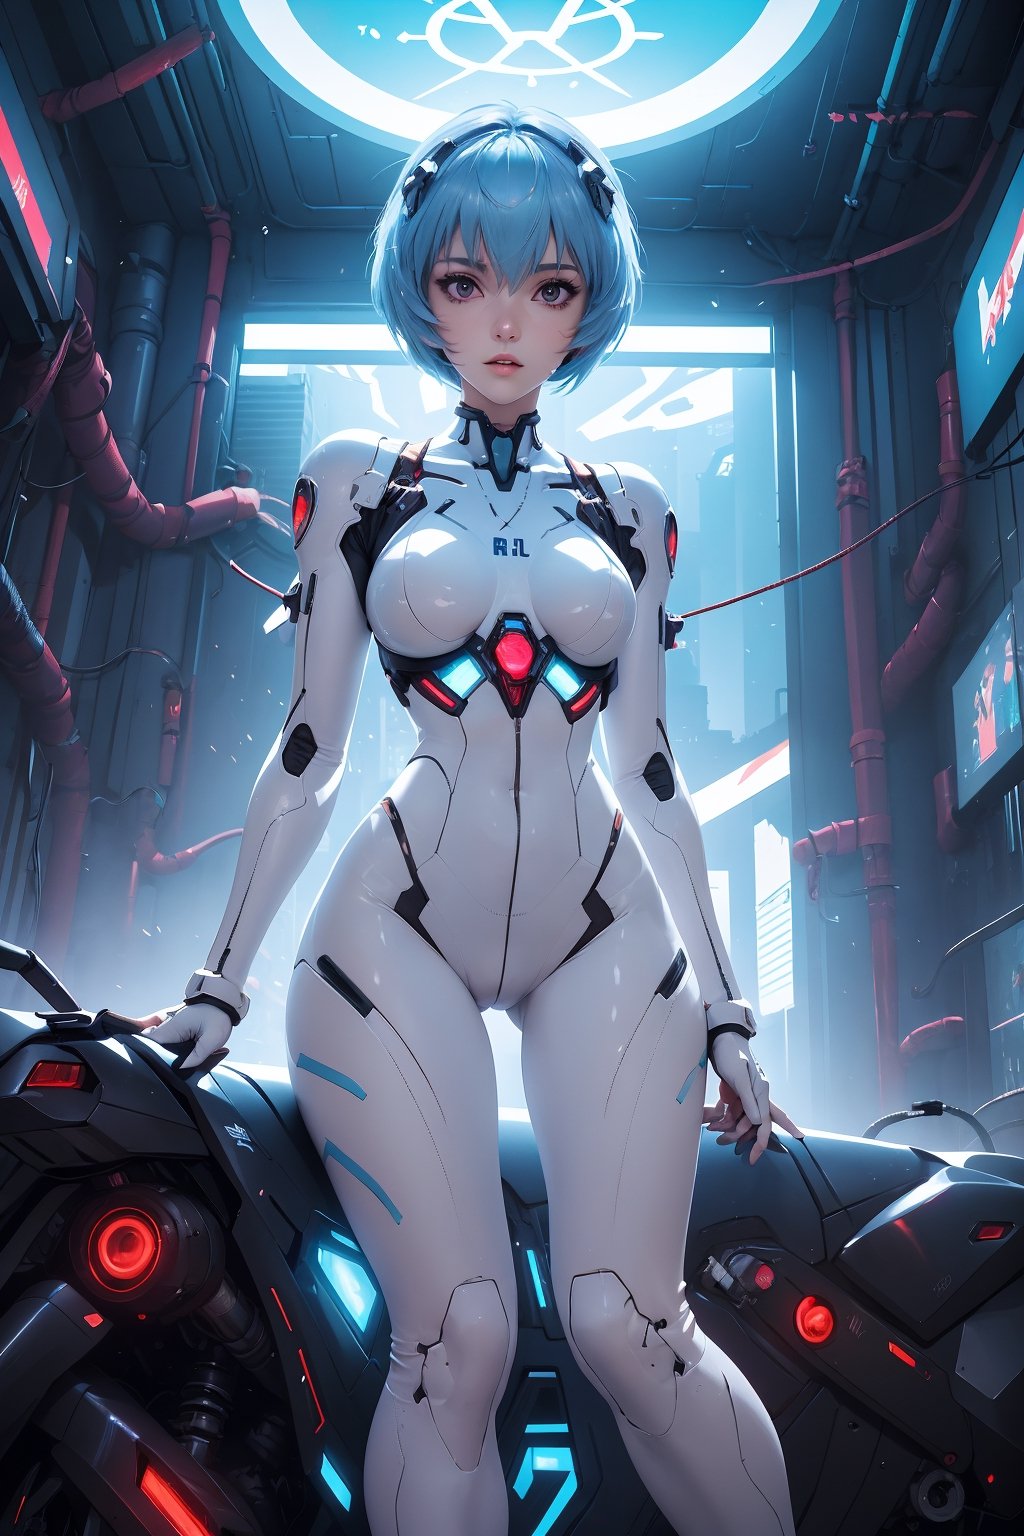 ((random sexy pose with open legs)), full body, (masterpiece),(Ayanami Rei) , perfect anatomy, (white bodysuit) (ultra detailed background of cyberpunk interior)), ((glowing shining crosses behind)) ,(light blue hair),Sexy Pose, color magic,girl,perfect,cyberpunk,Enhance, ayanami_rei,  interface headset